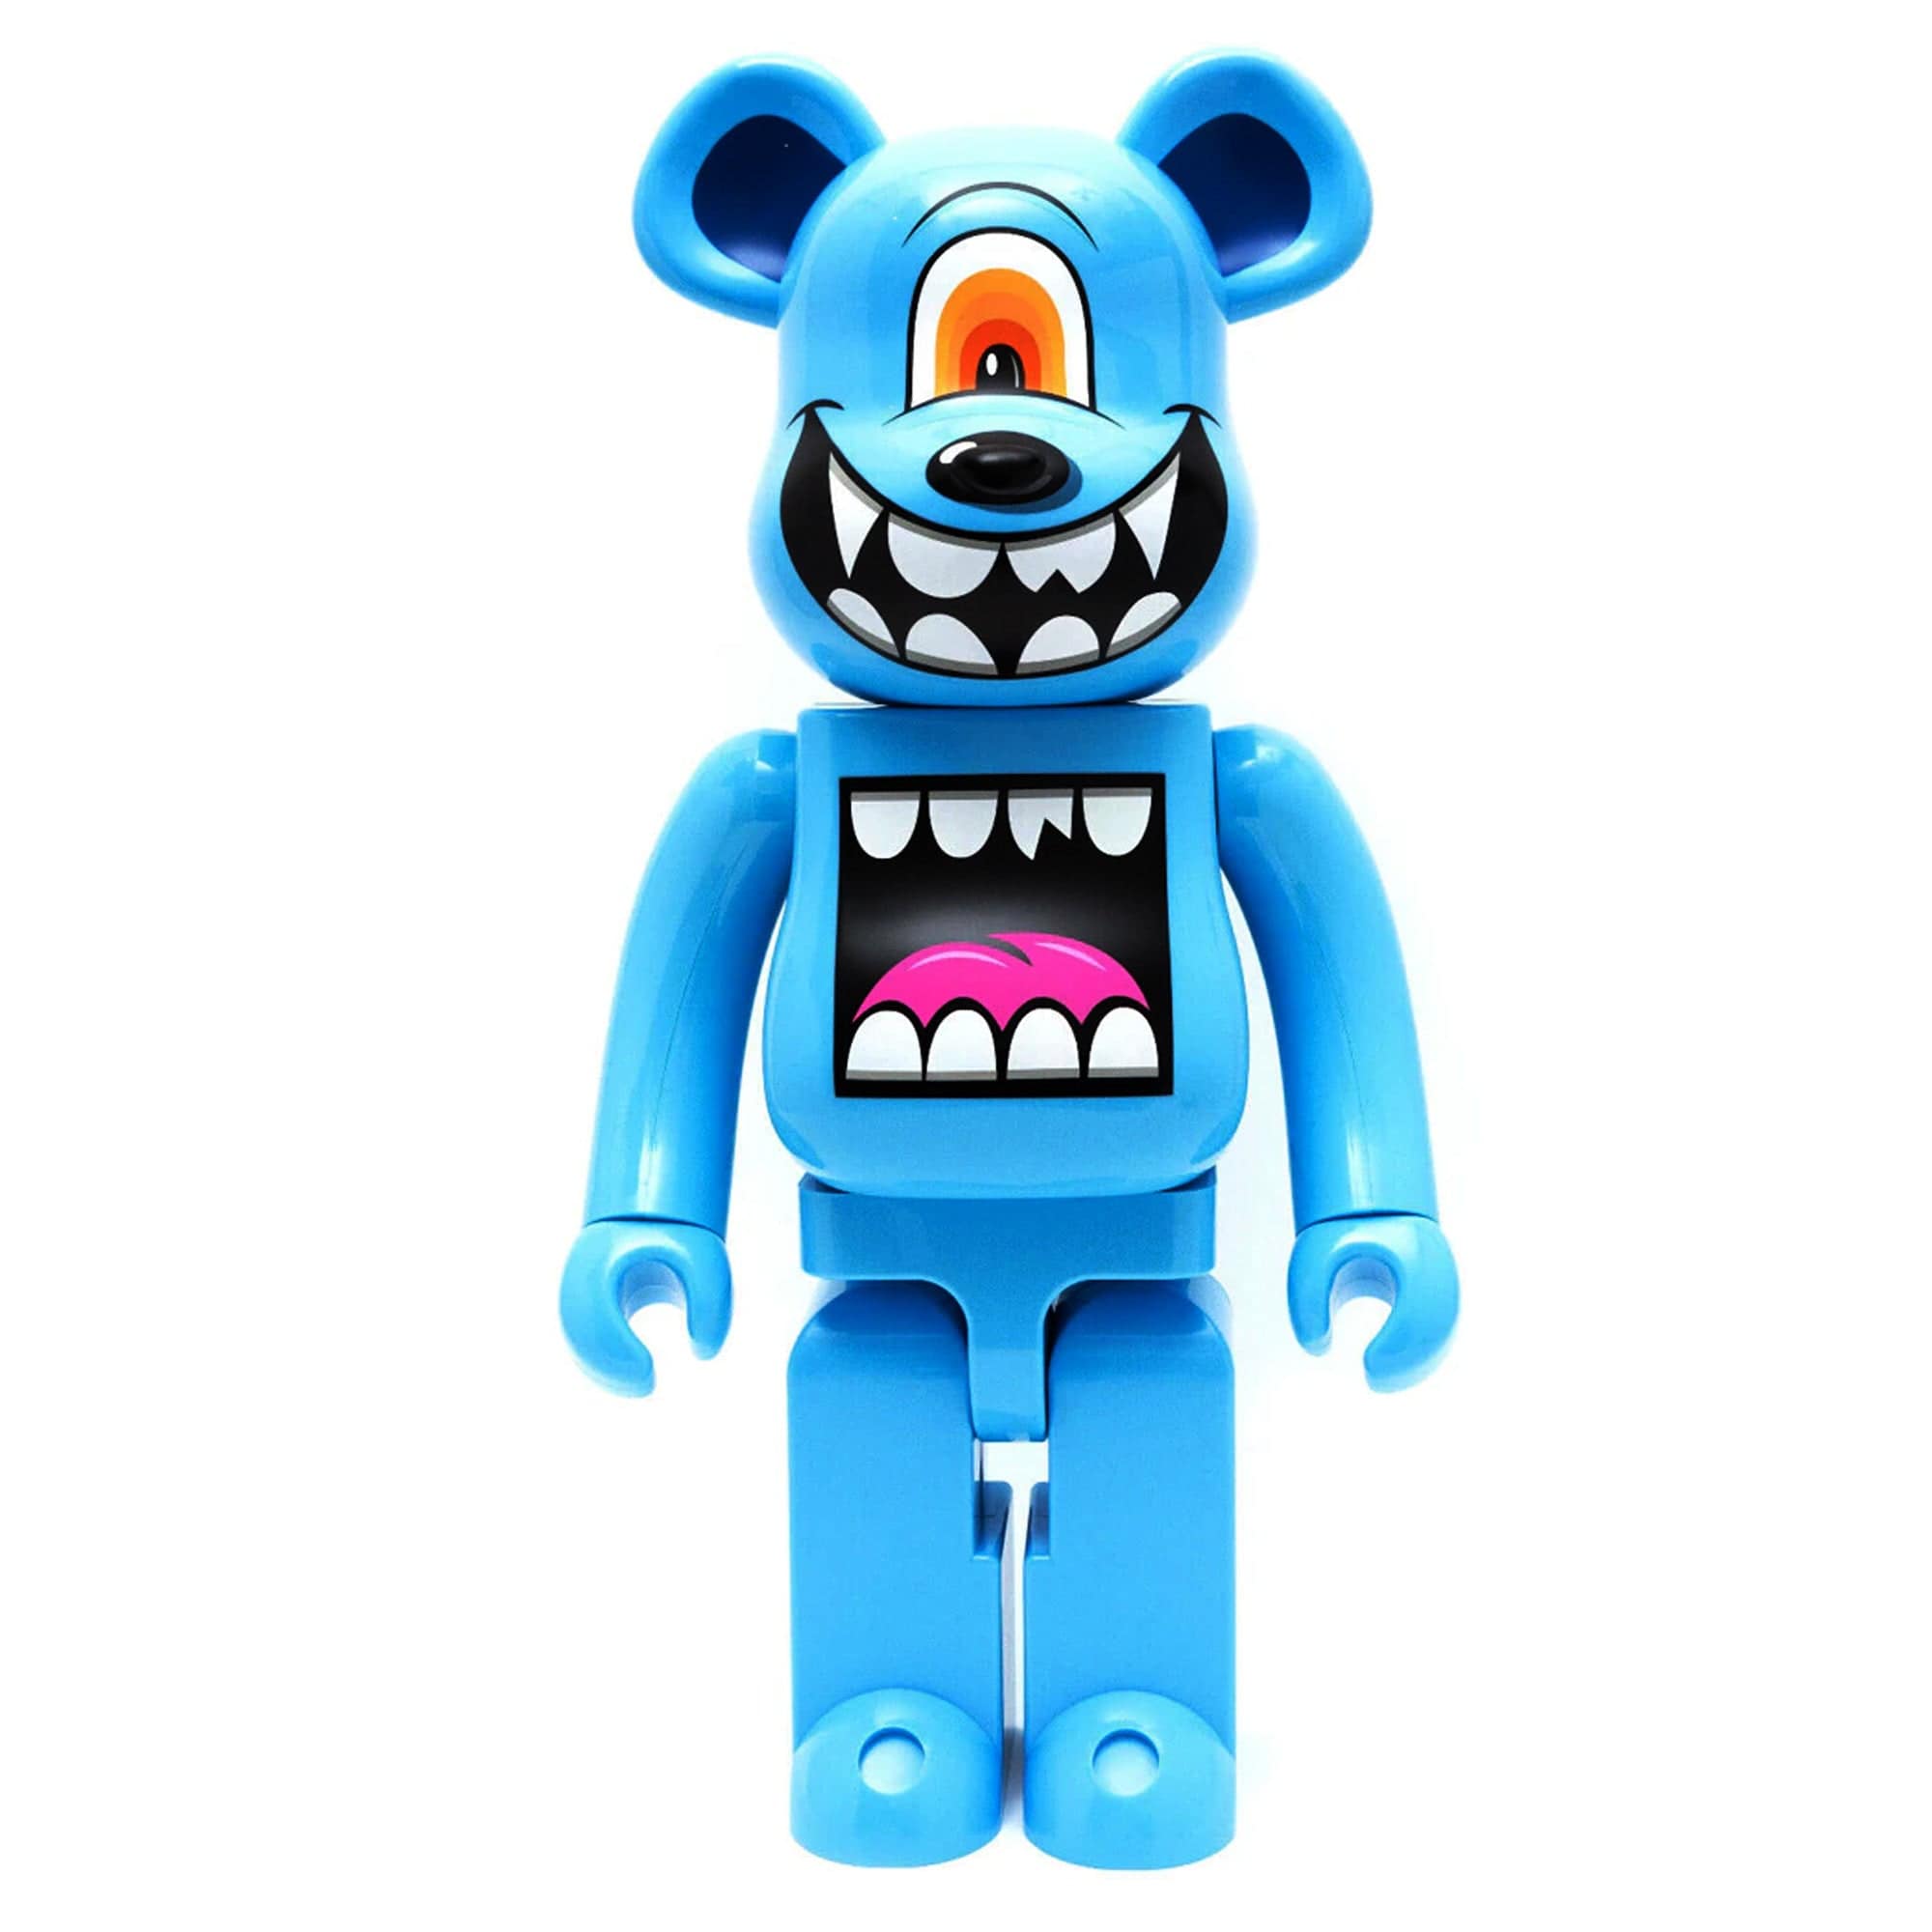 Greg Mike 1000% Bearbrick DCON Exclusive by Medicom